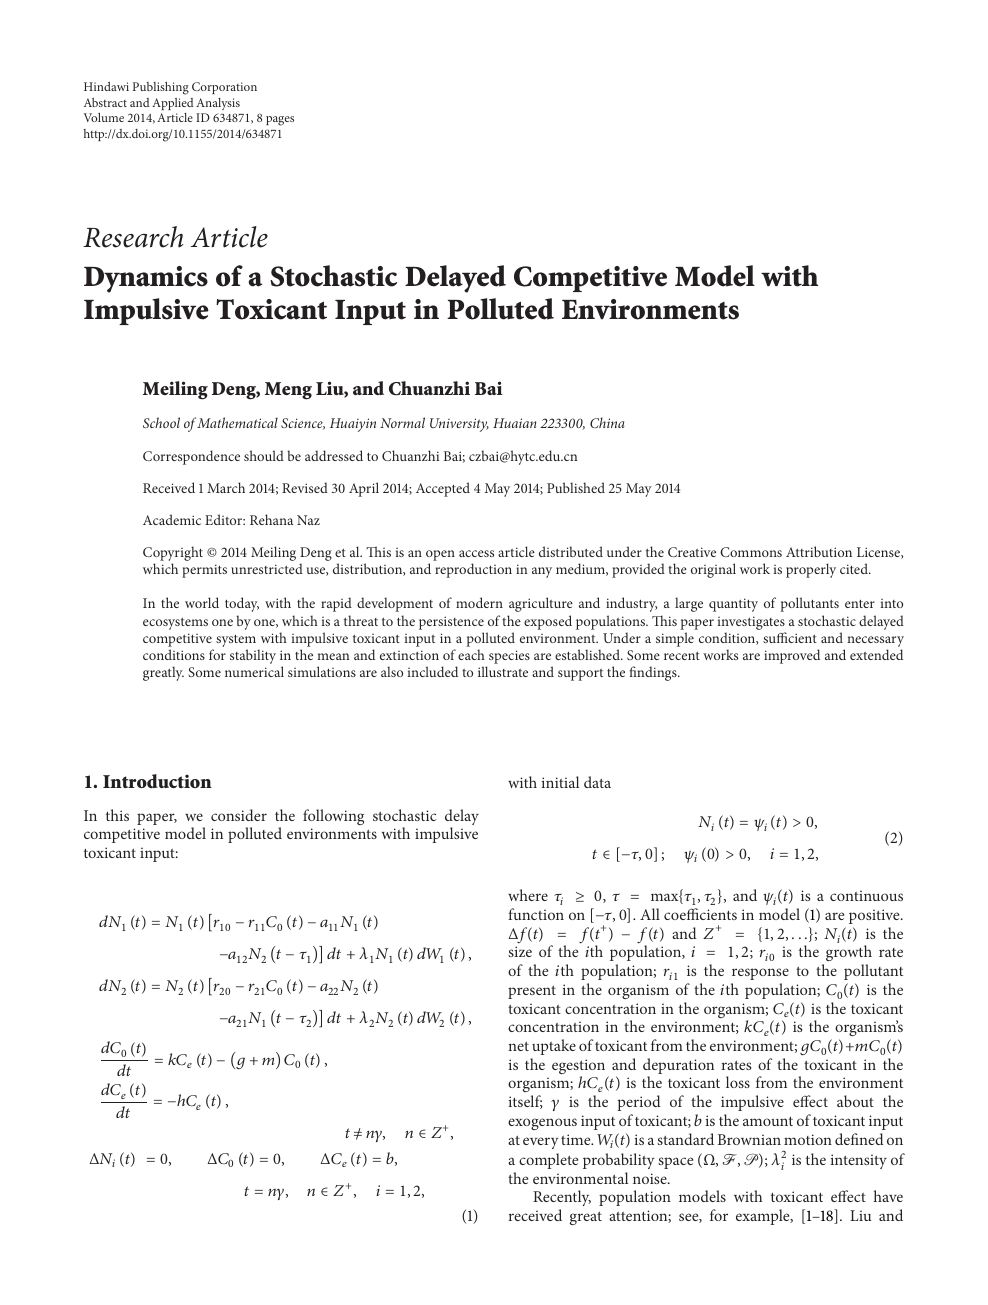 Dynamics Of A Stochastic Delayed Competitive Model With Impulsive Toxicant Input In Polluted Environments Topic Of Research Paper In Mathematics Download Scholarly Article Pdf And Read For Free On Cyberleninka Open